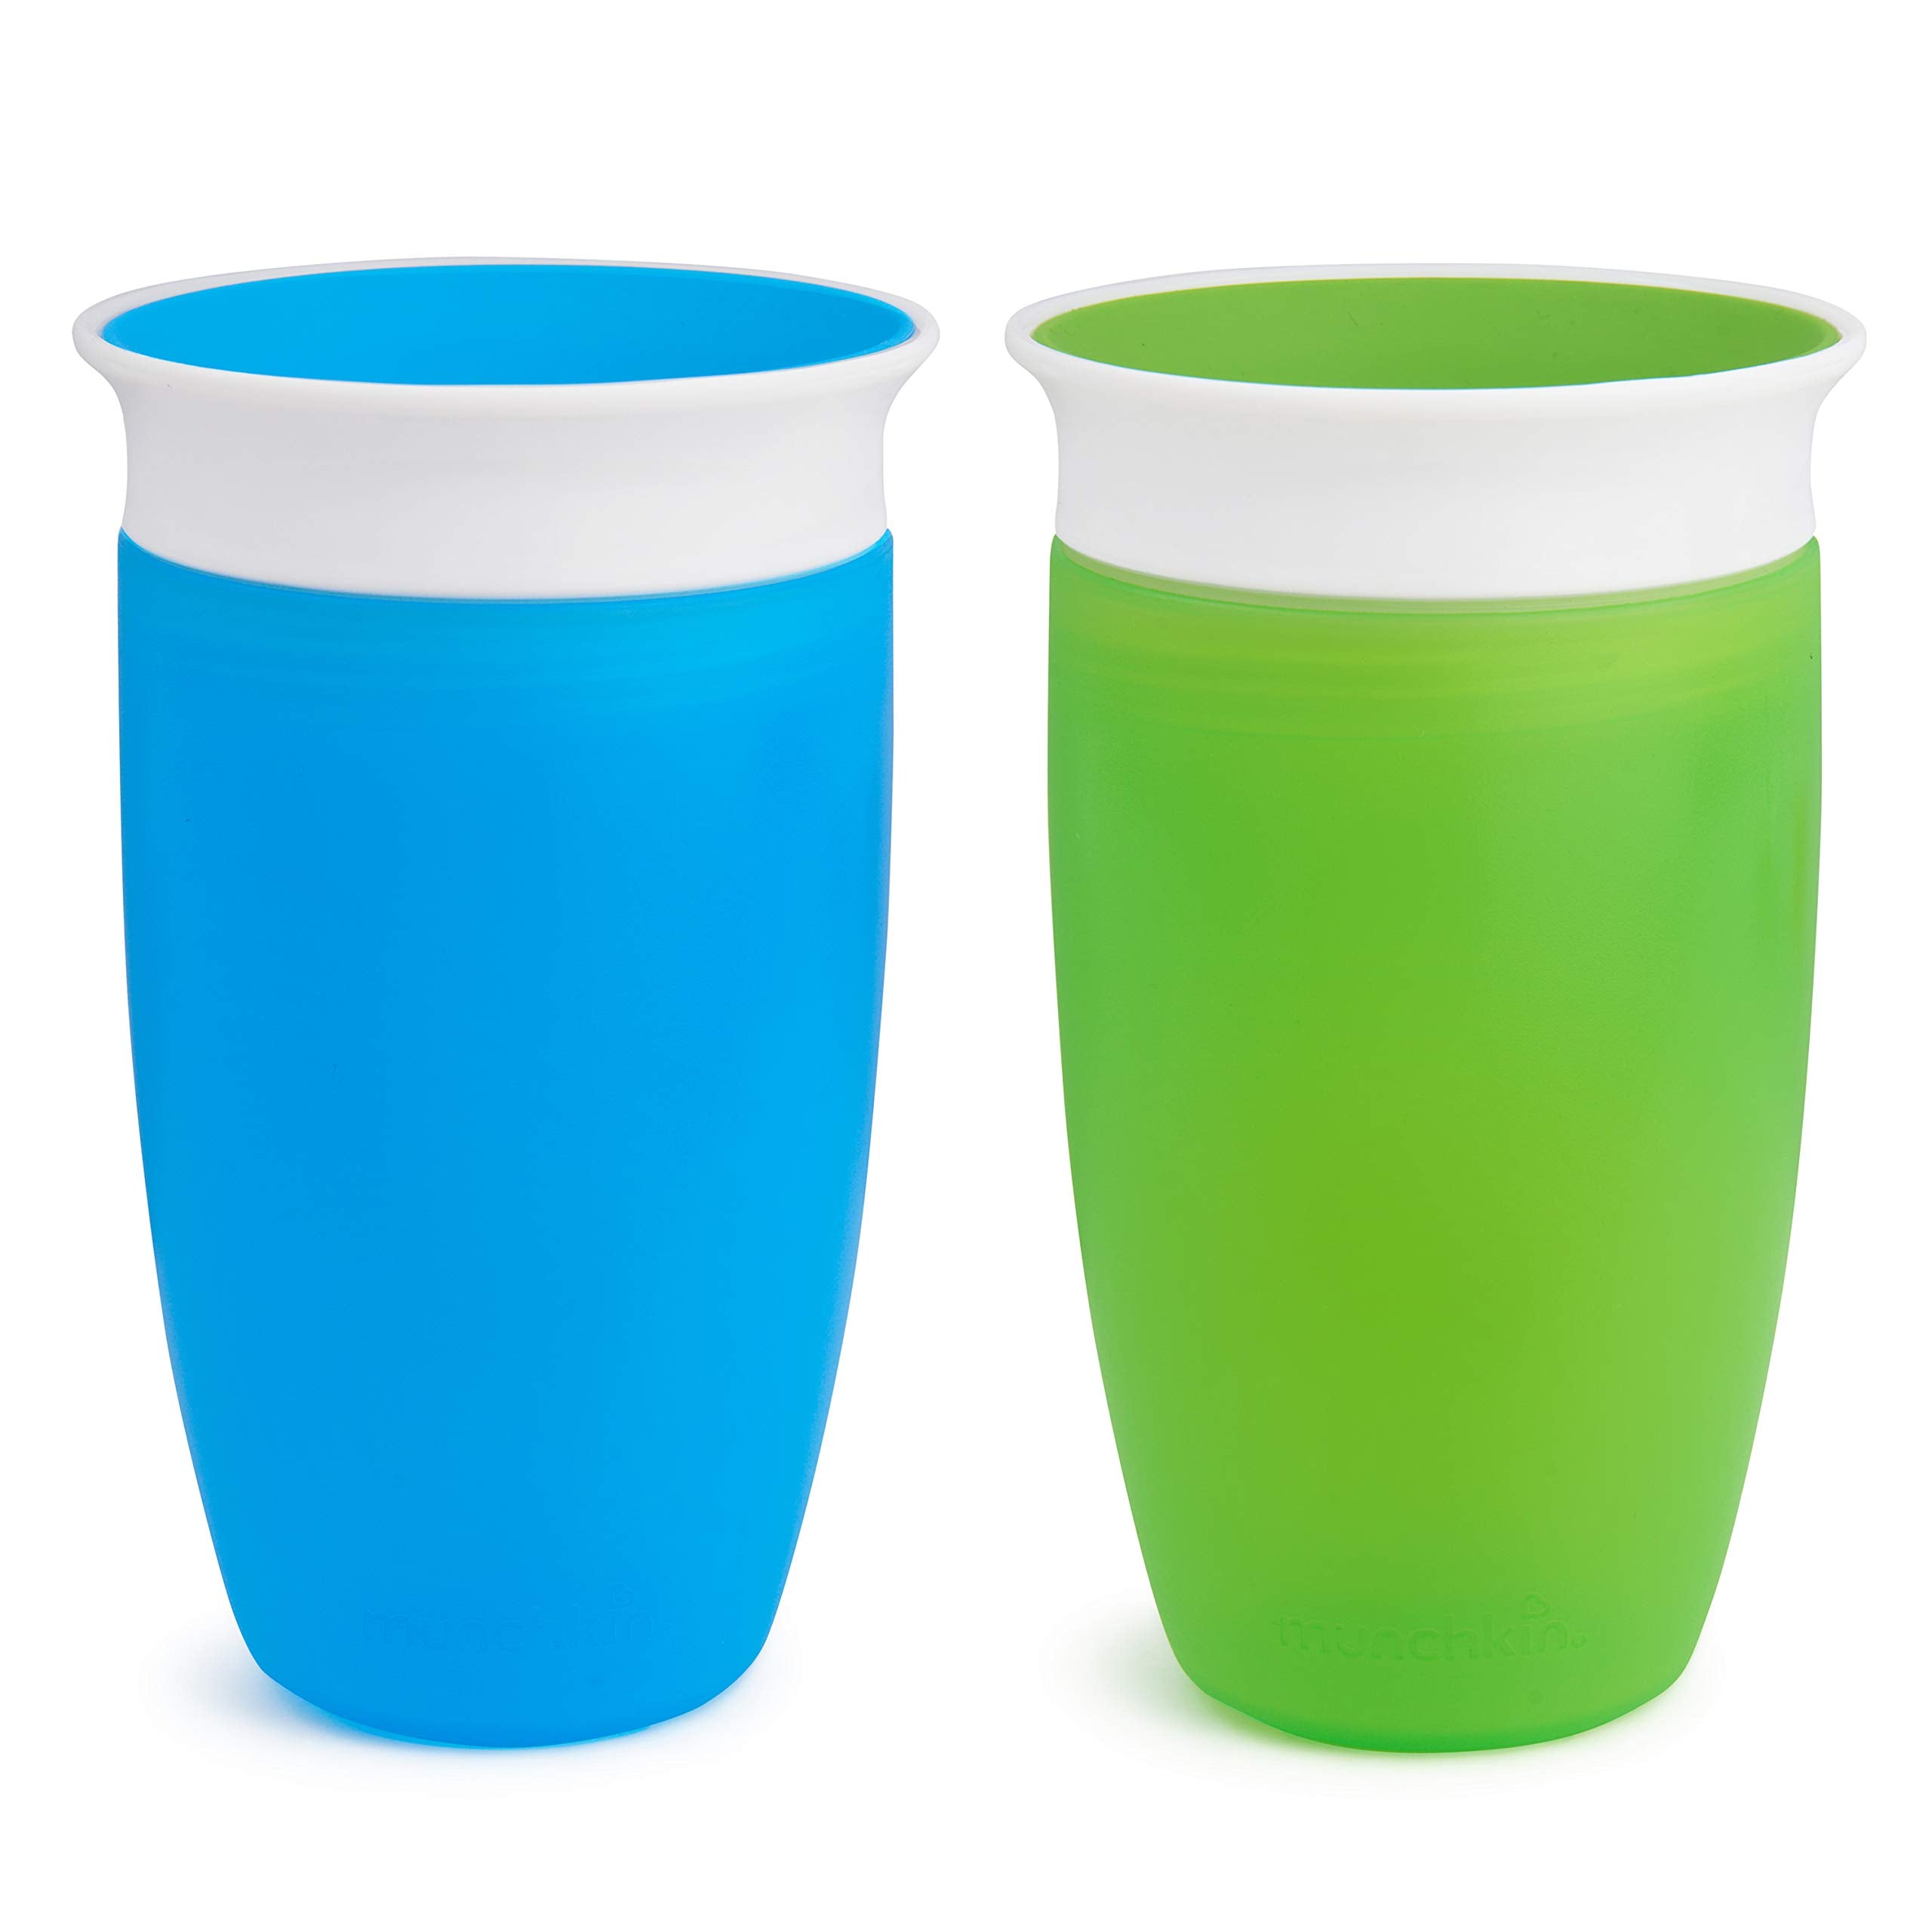 Munchkin Miracle 360 Sippy Cup, Green/Blue, 10oz/296 ml, 2 Pack